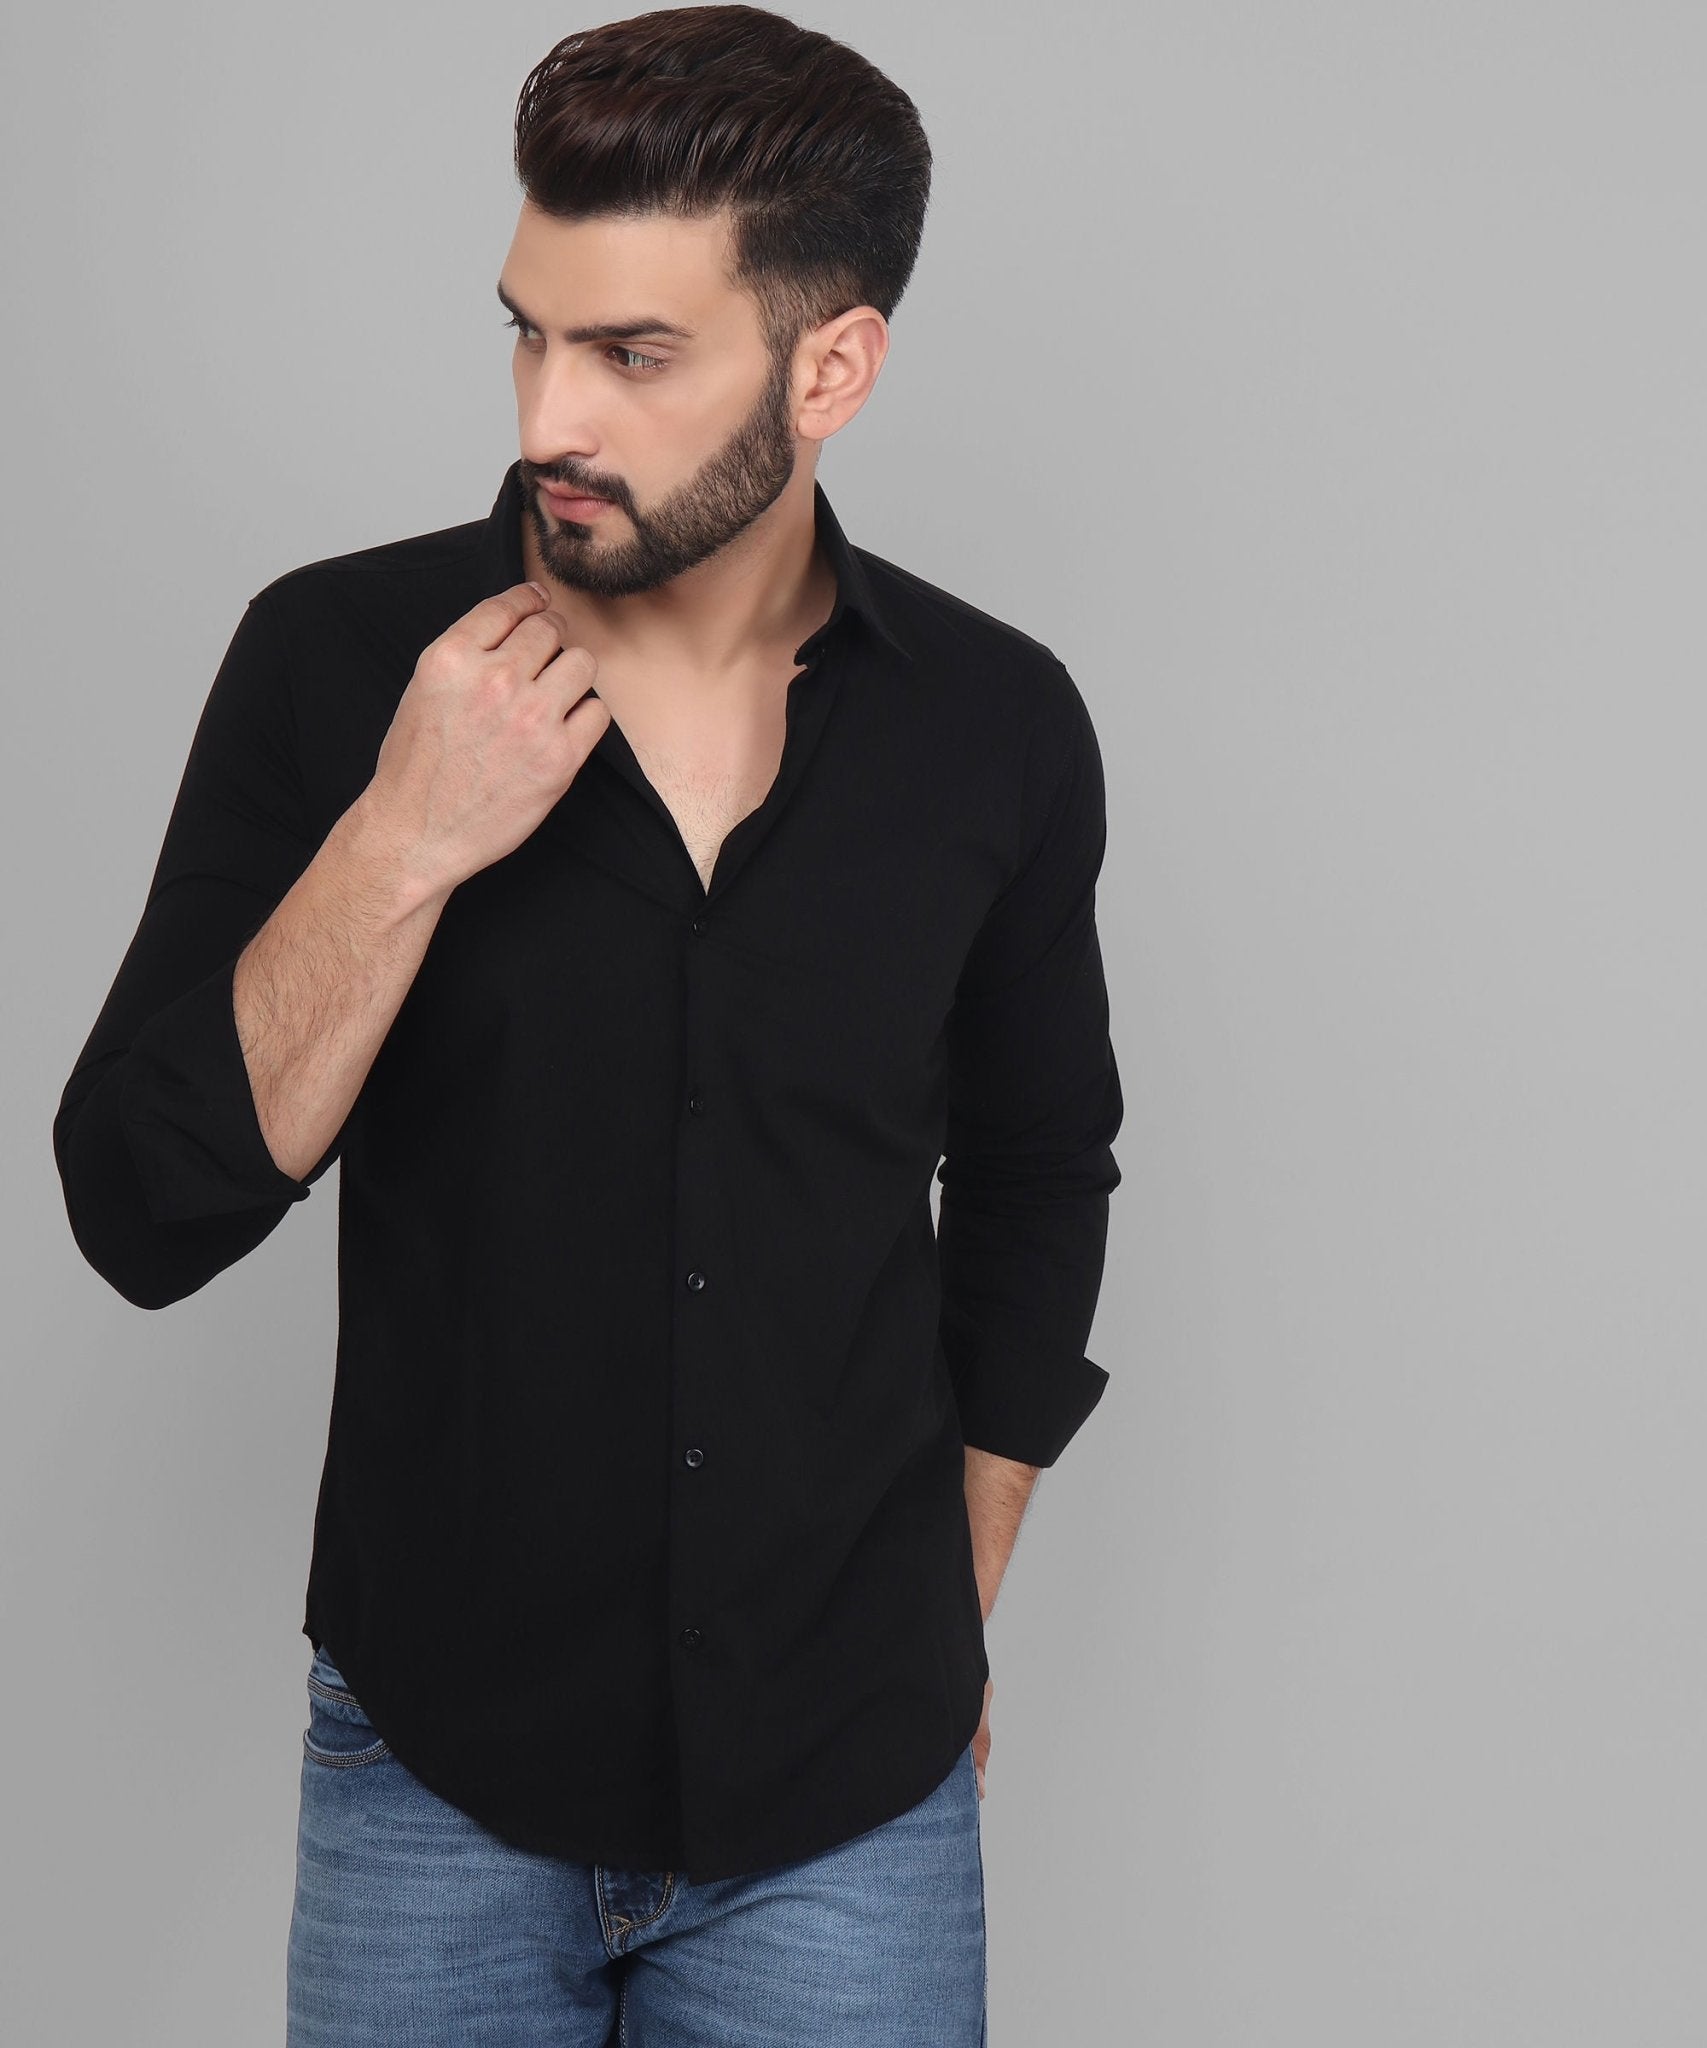 TryBuy Exclusive Black Solid Button Down Cotton Shirt for Men - TryBuy® USA🇺🇸